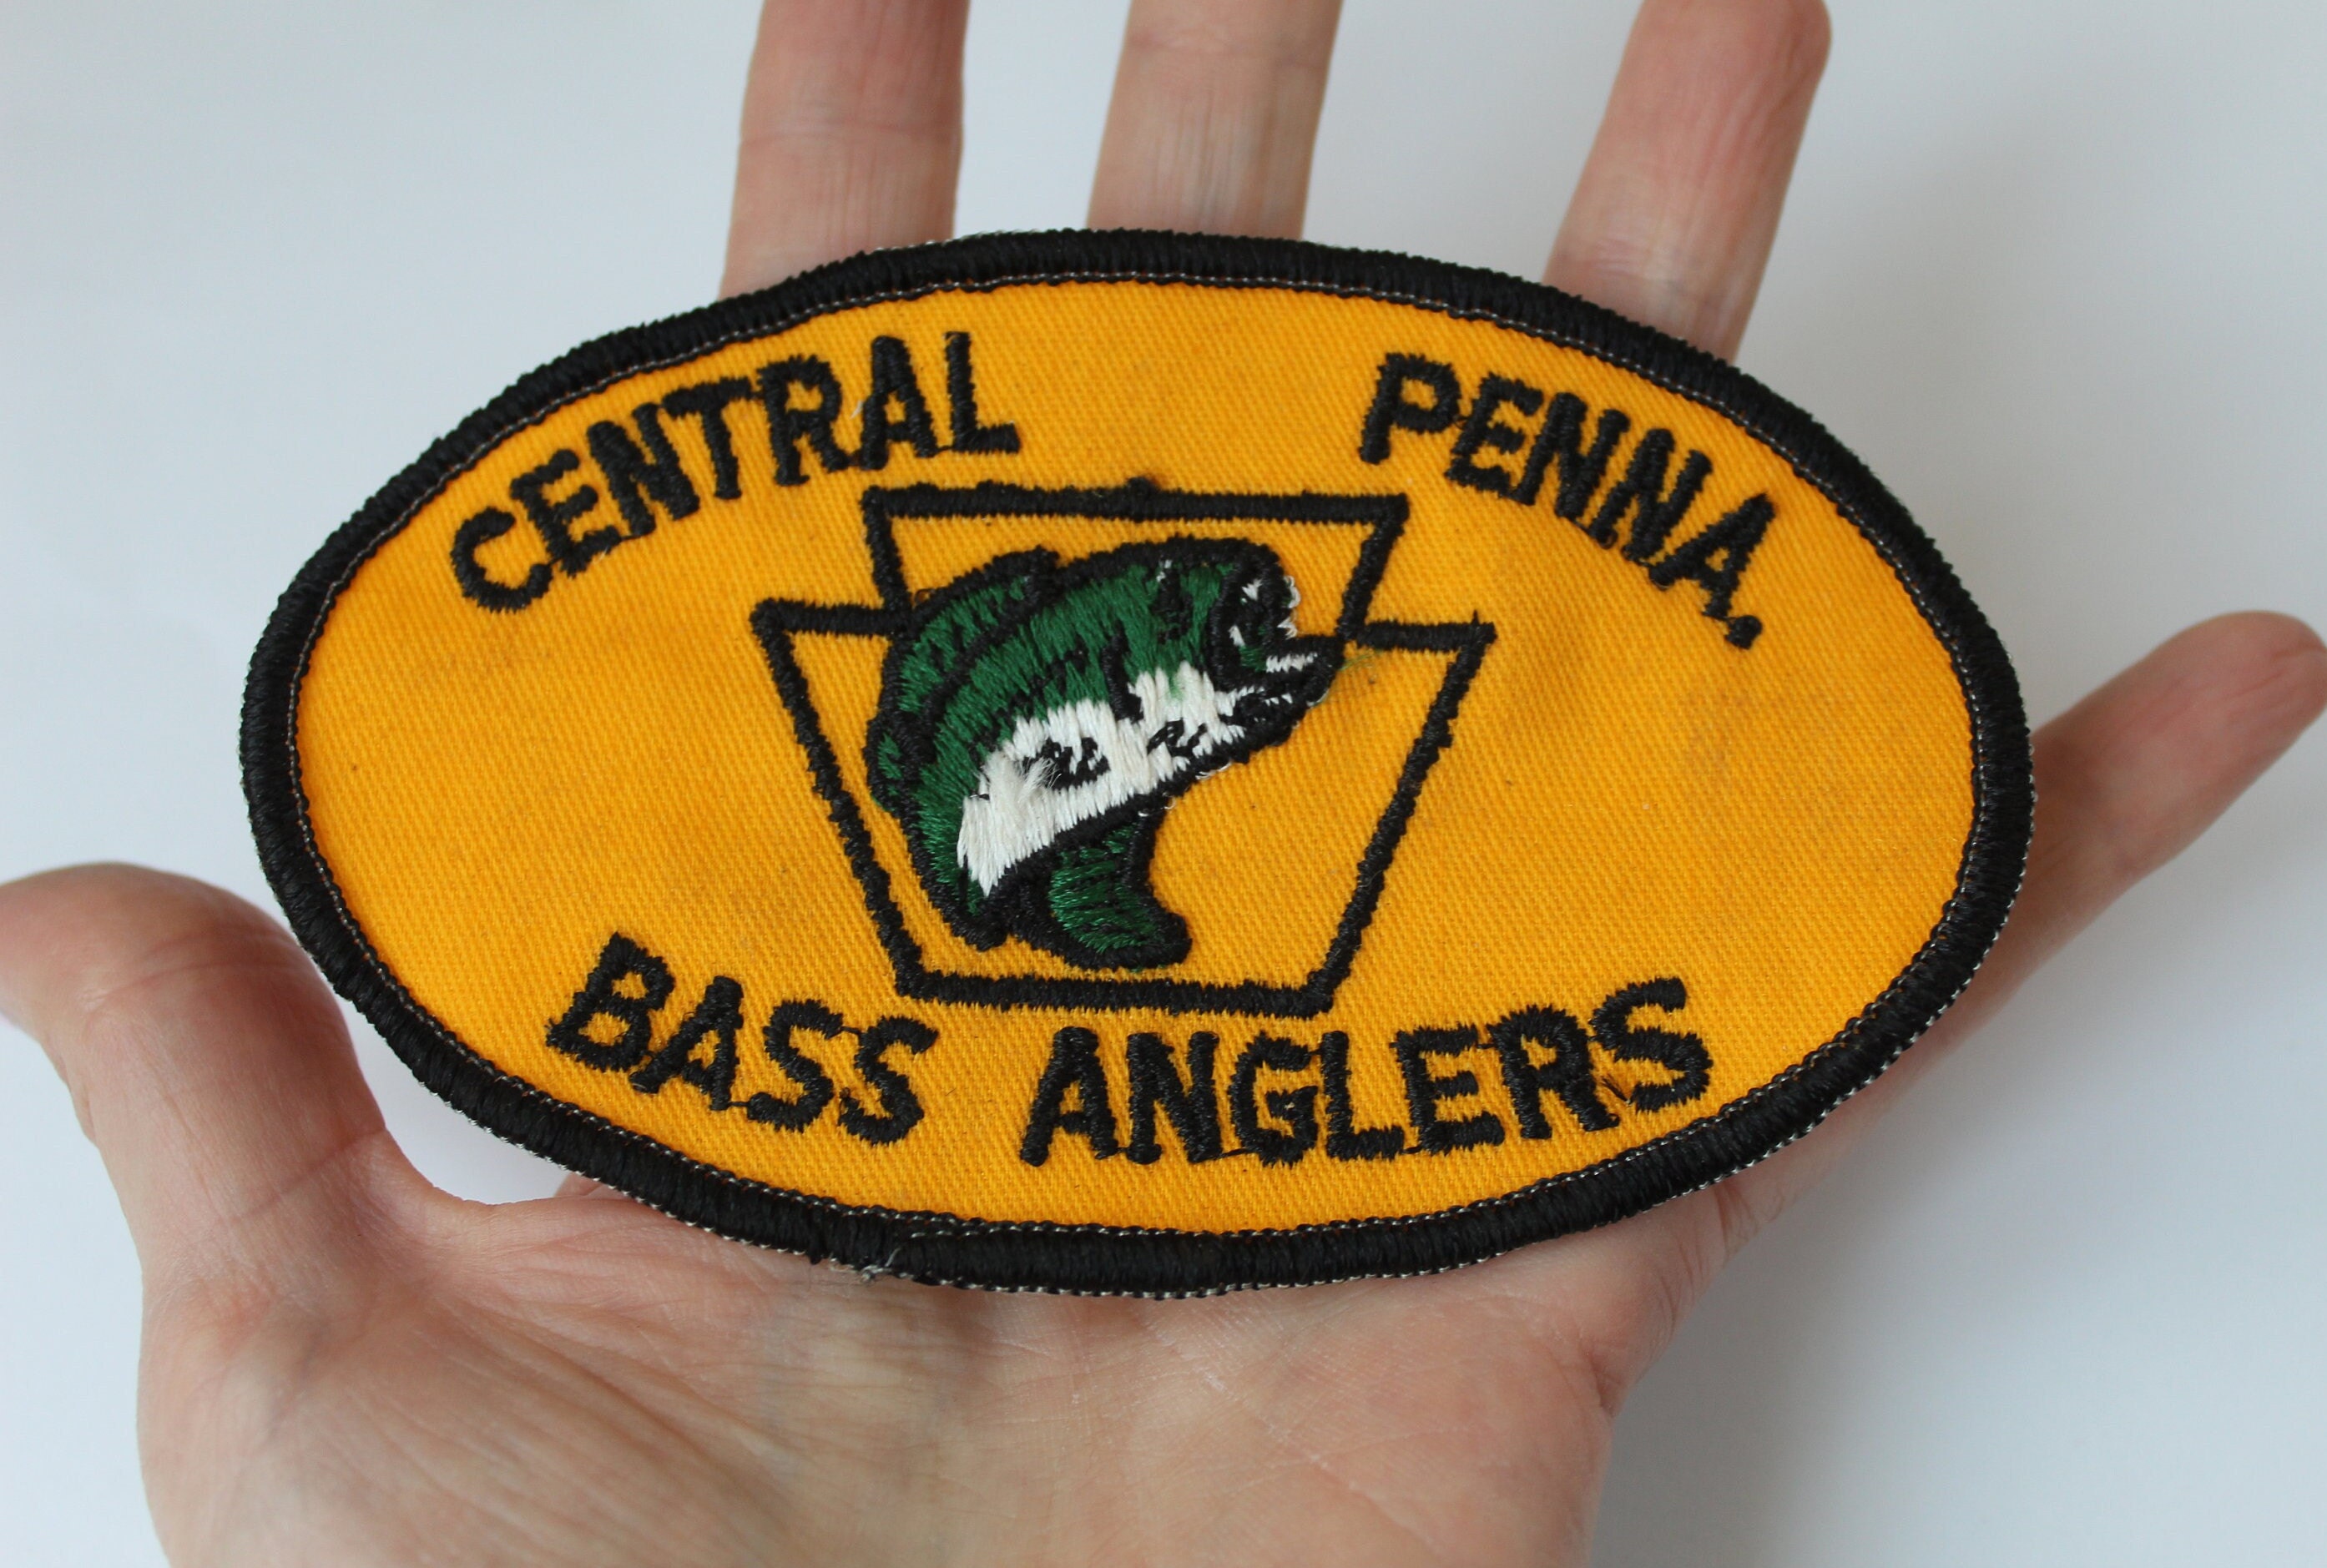 Vintage Older Fishing Patch Pennsylvania Bass Anglers, Old Cheesecloth  Backing, Central Penna Bass Anglers Unused Patch -  UK